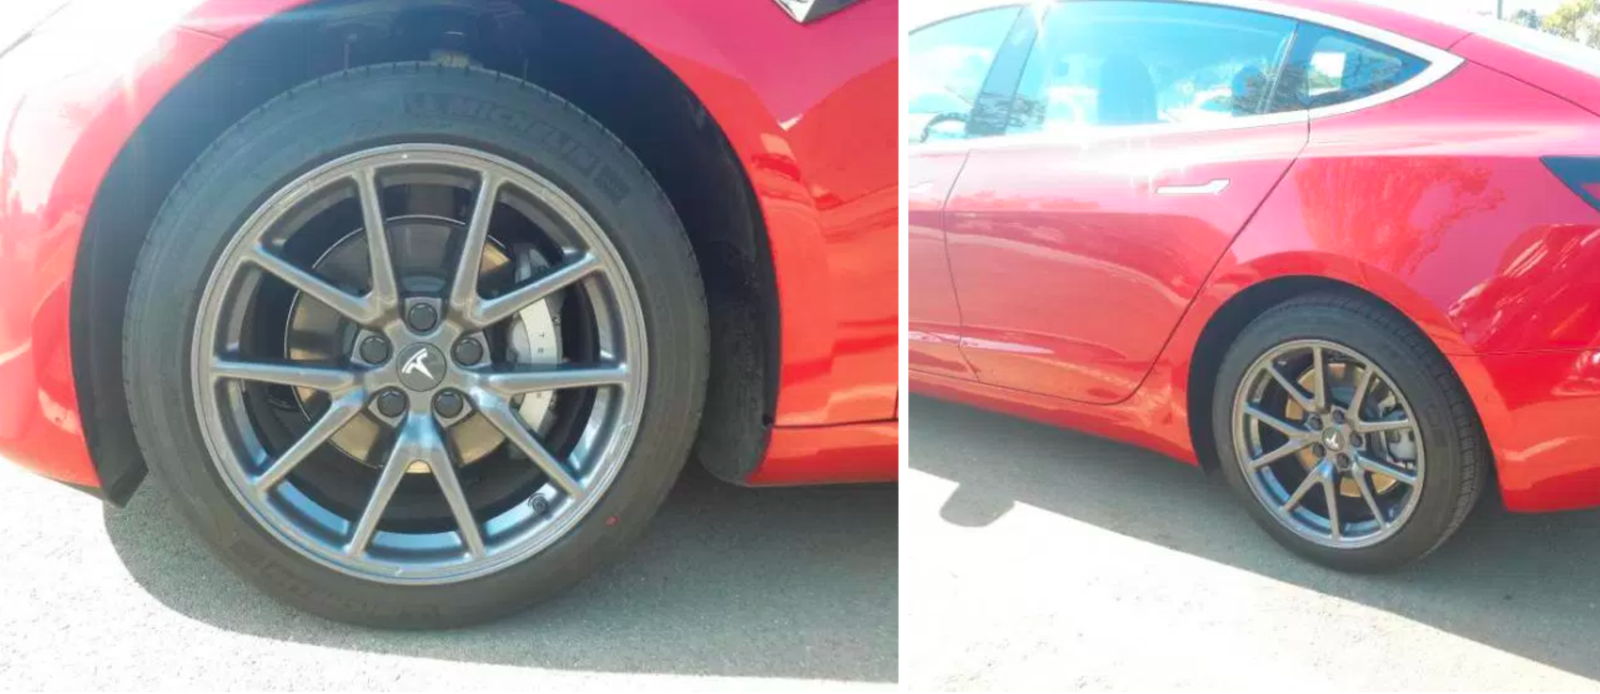 Heres how easy it is to make Tesla Model 3 wheels look good by removing aero caps